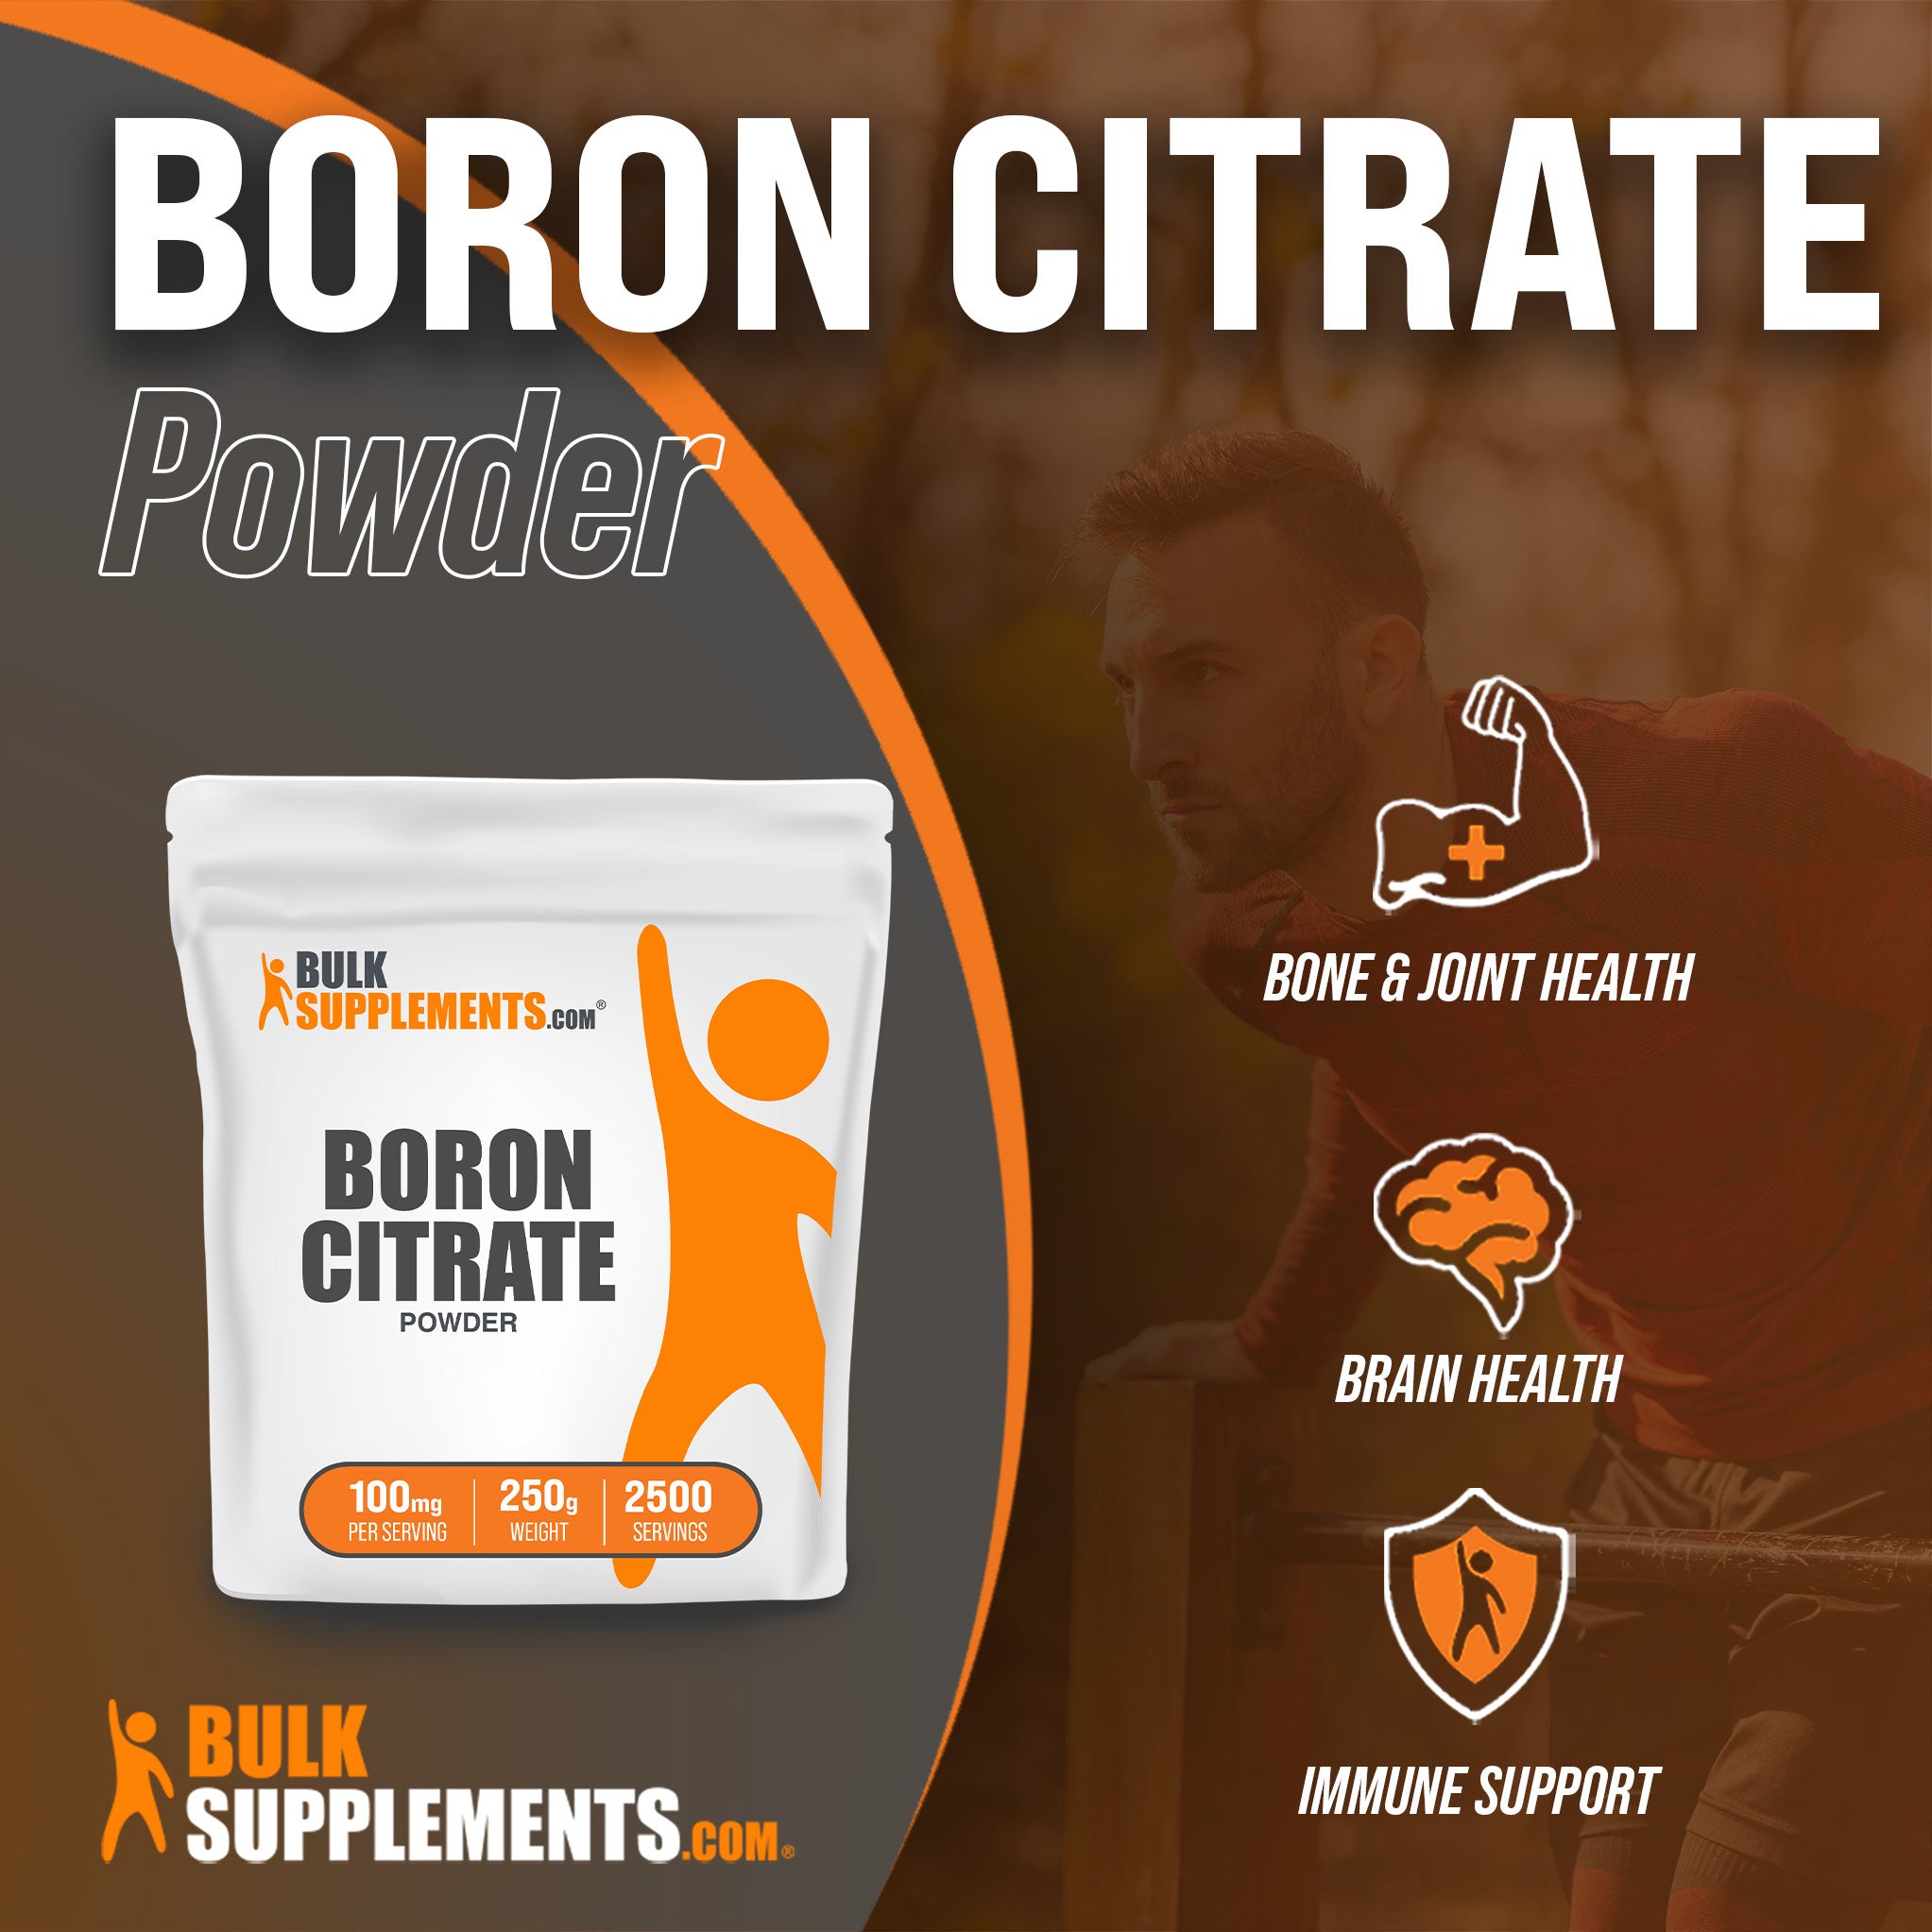 250g of Boron Citrate: 100mg Servings